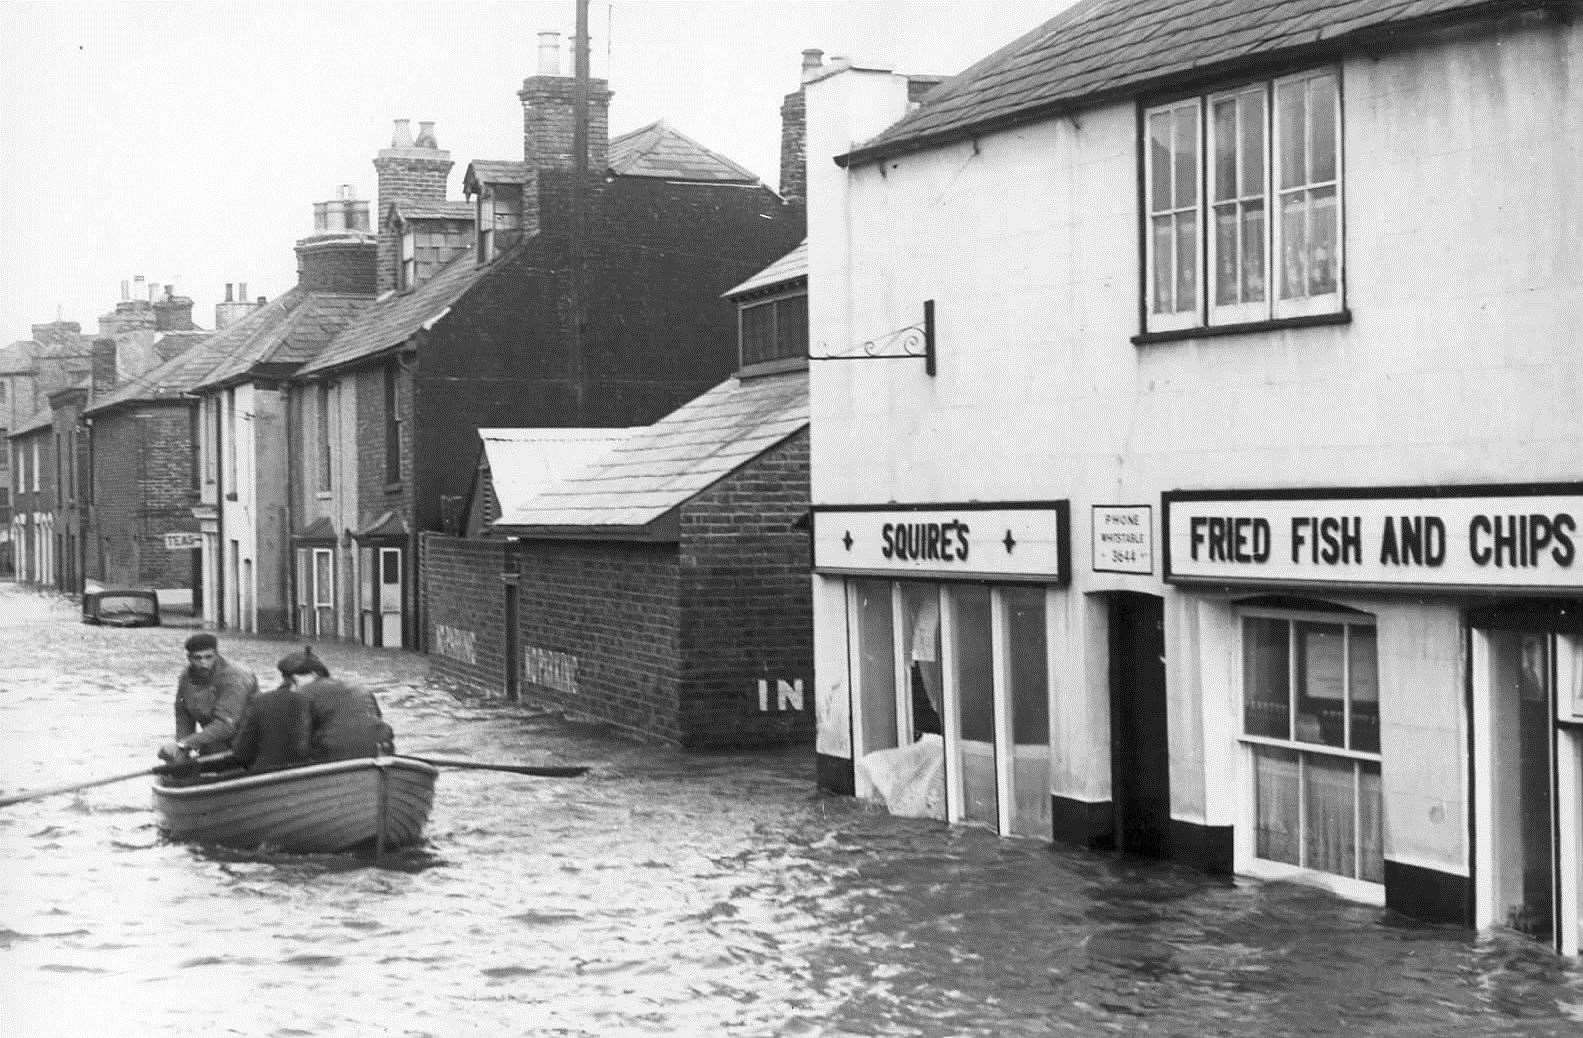 Floodwater poured into the streets of Whitstable in 1953